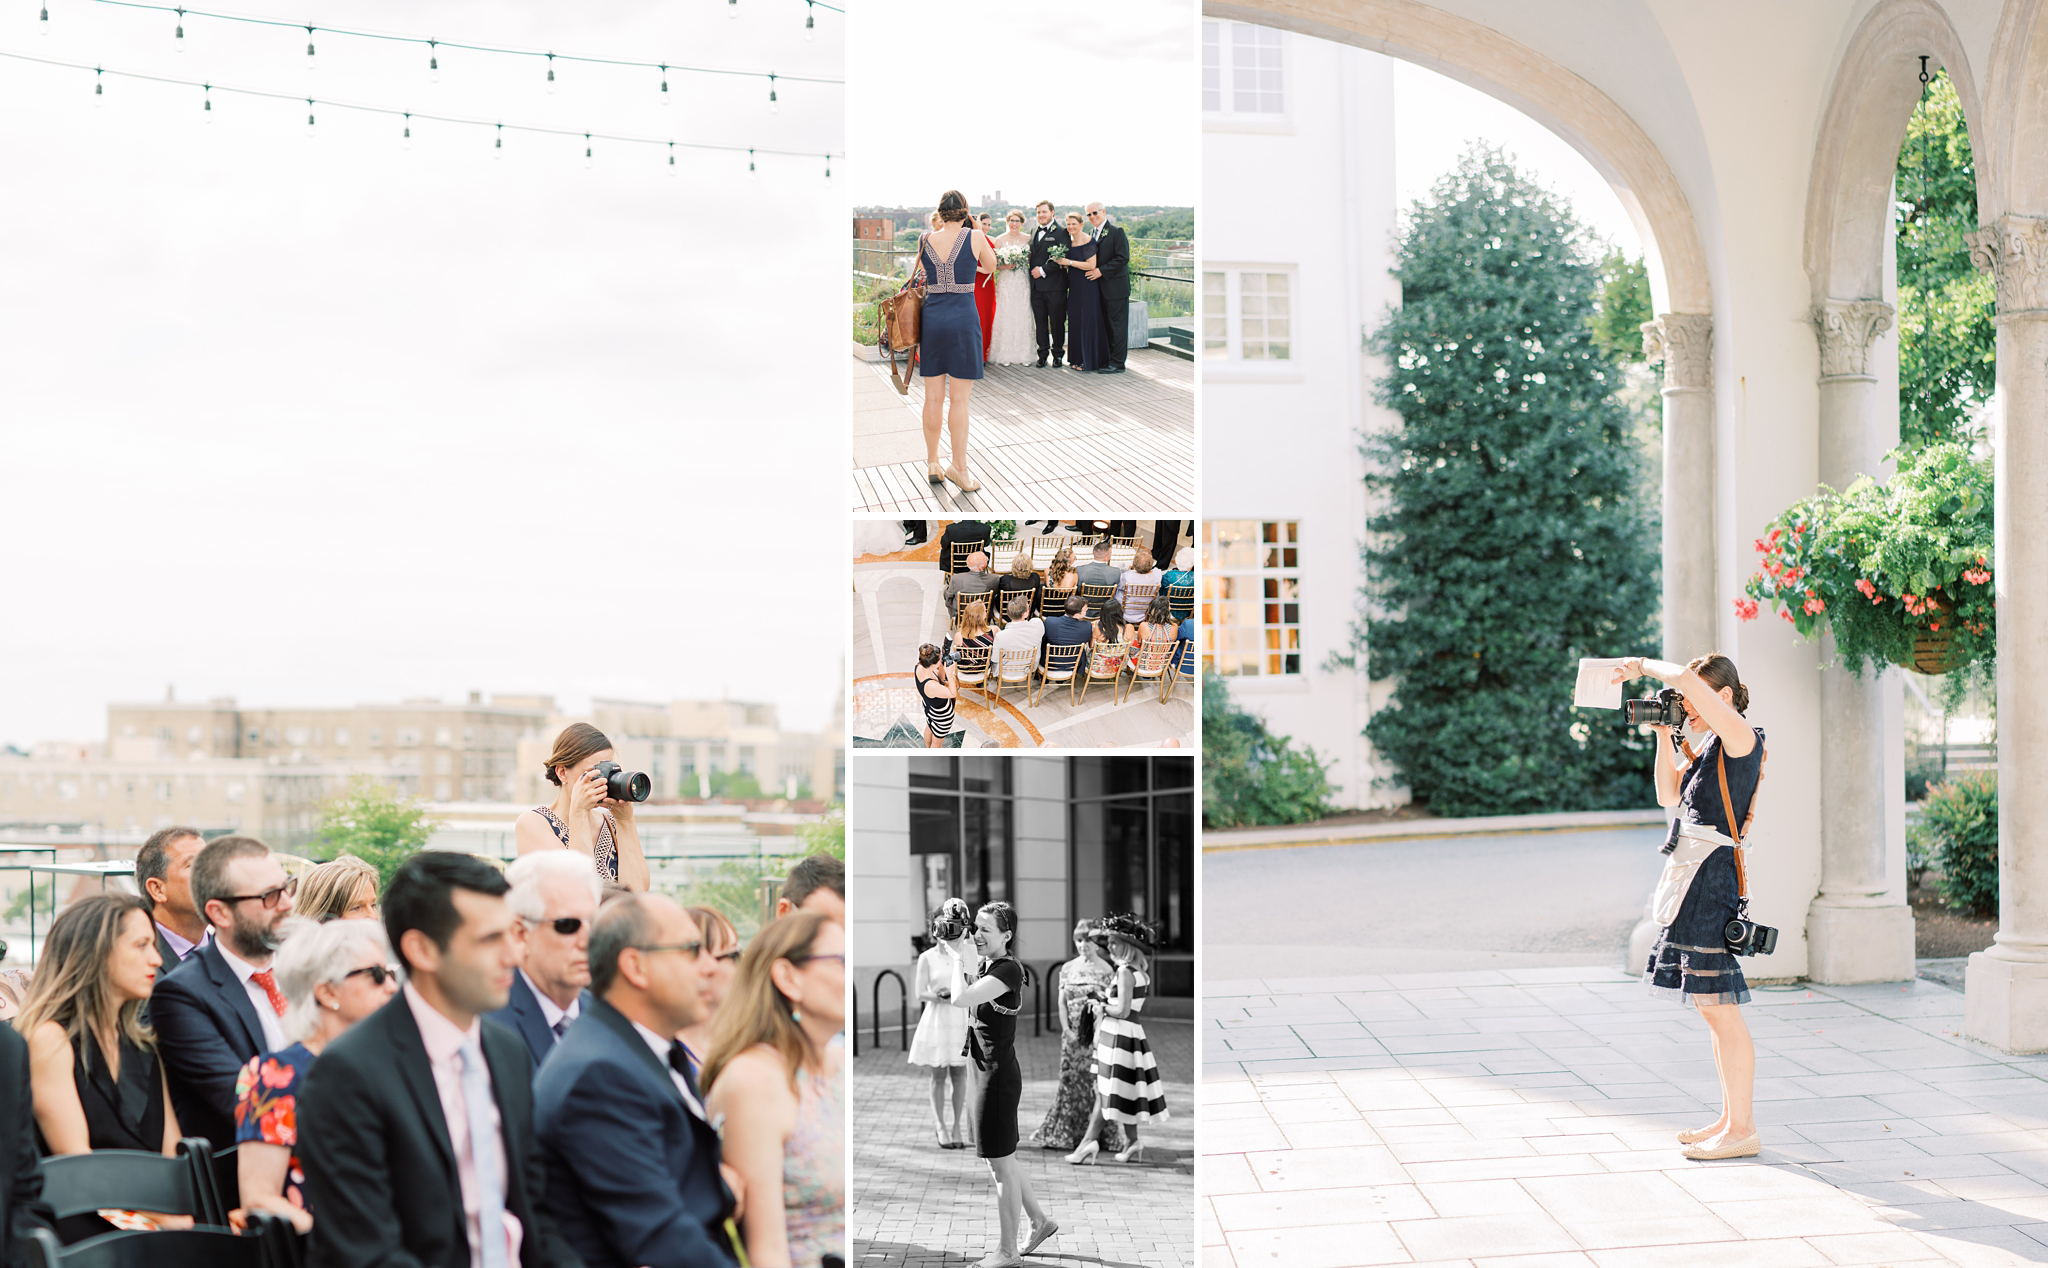 Go behind the scenes during the 2019 season with this Washington, DC wedding photographer to see all the fun that takes place on a client's big day!